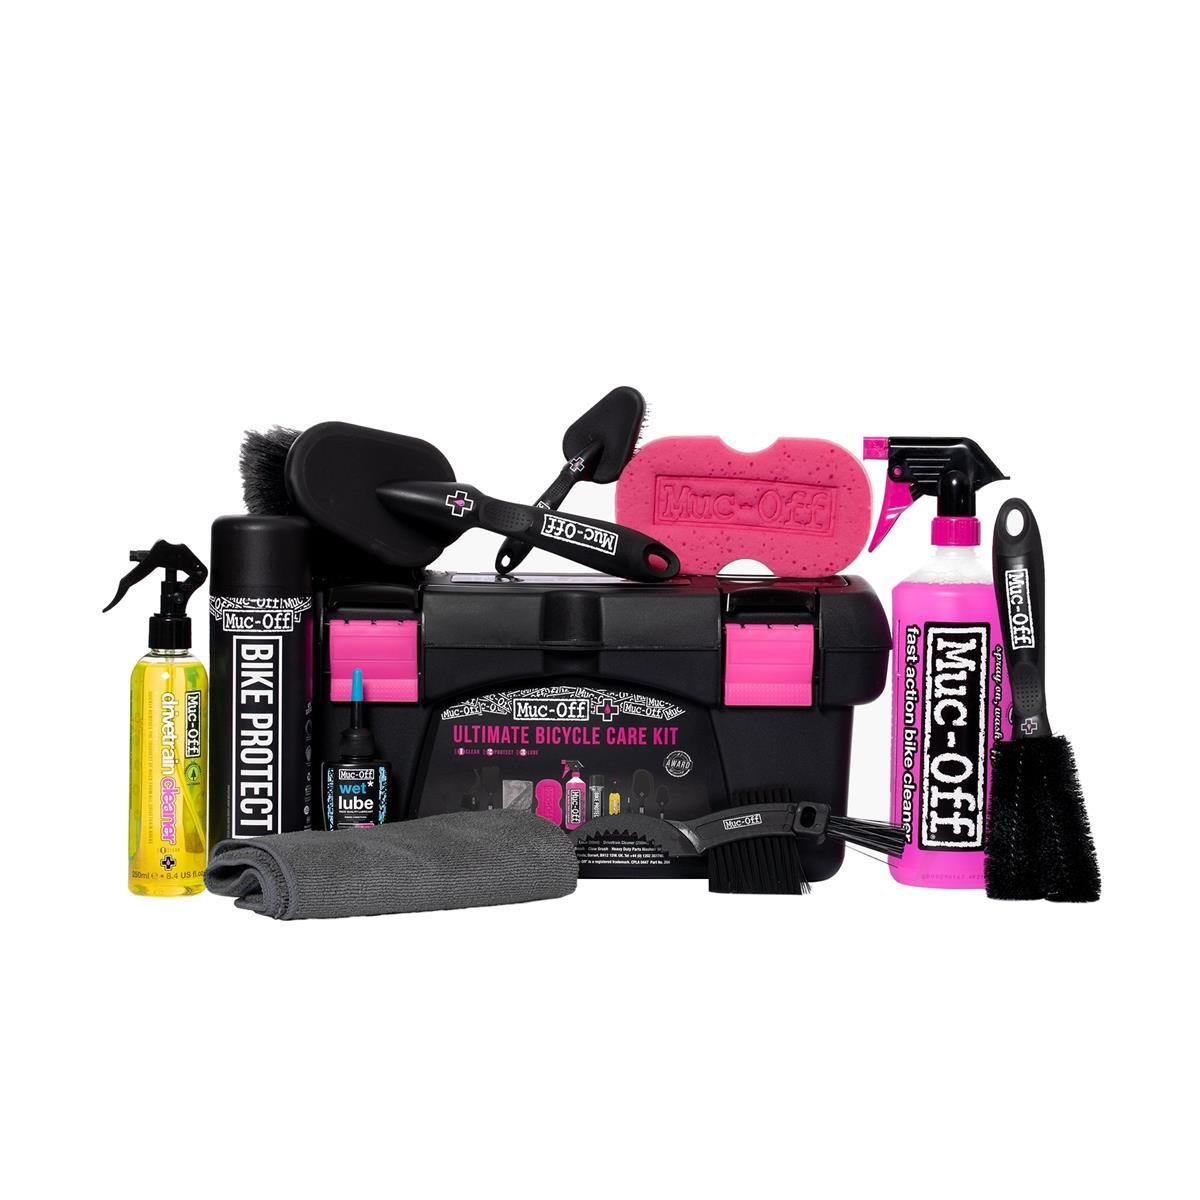 Muc-Off Bike Cleaner Ultimate Bicycle Clean Complete kit 10 in 1